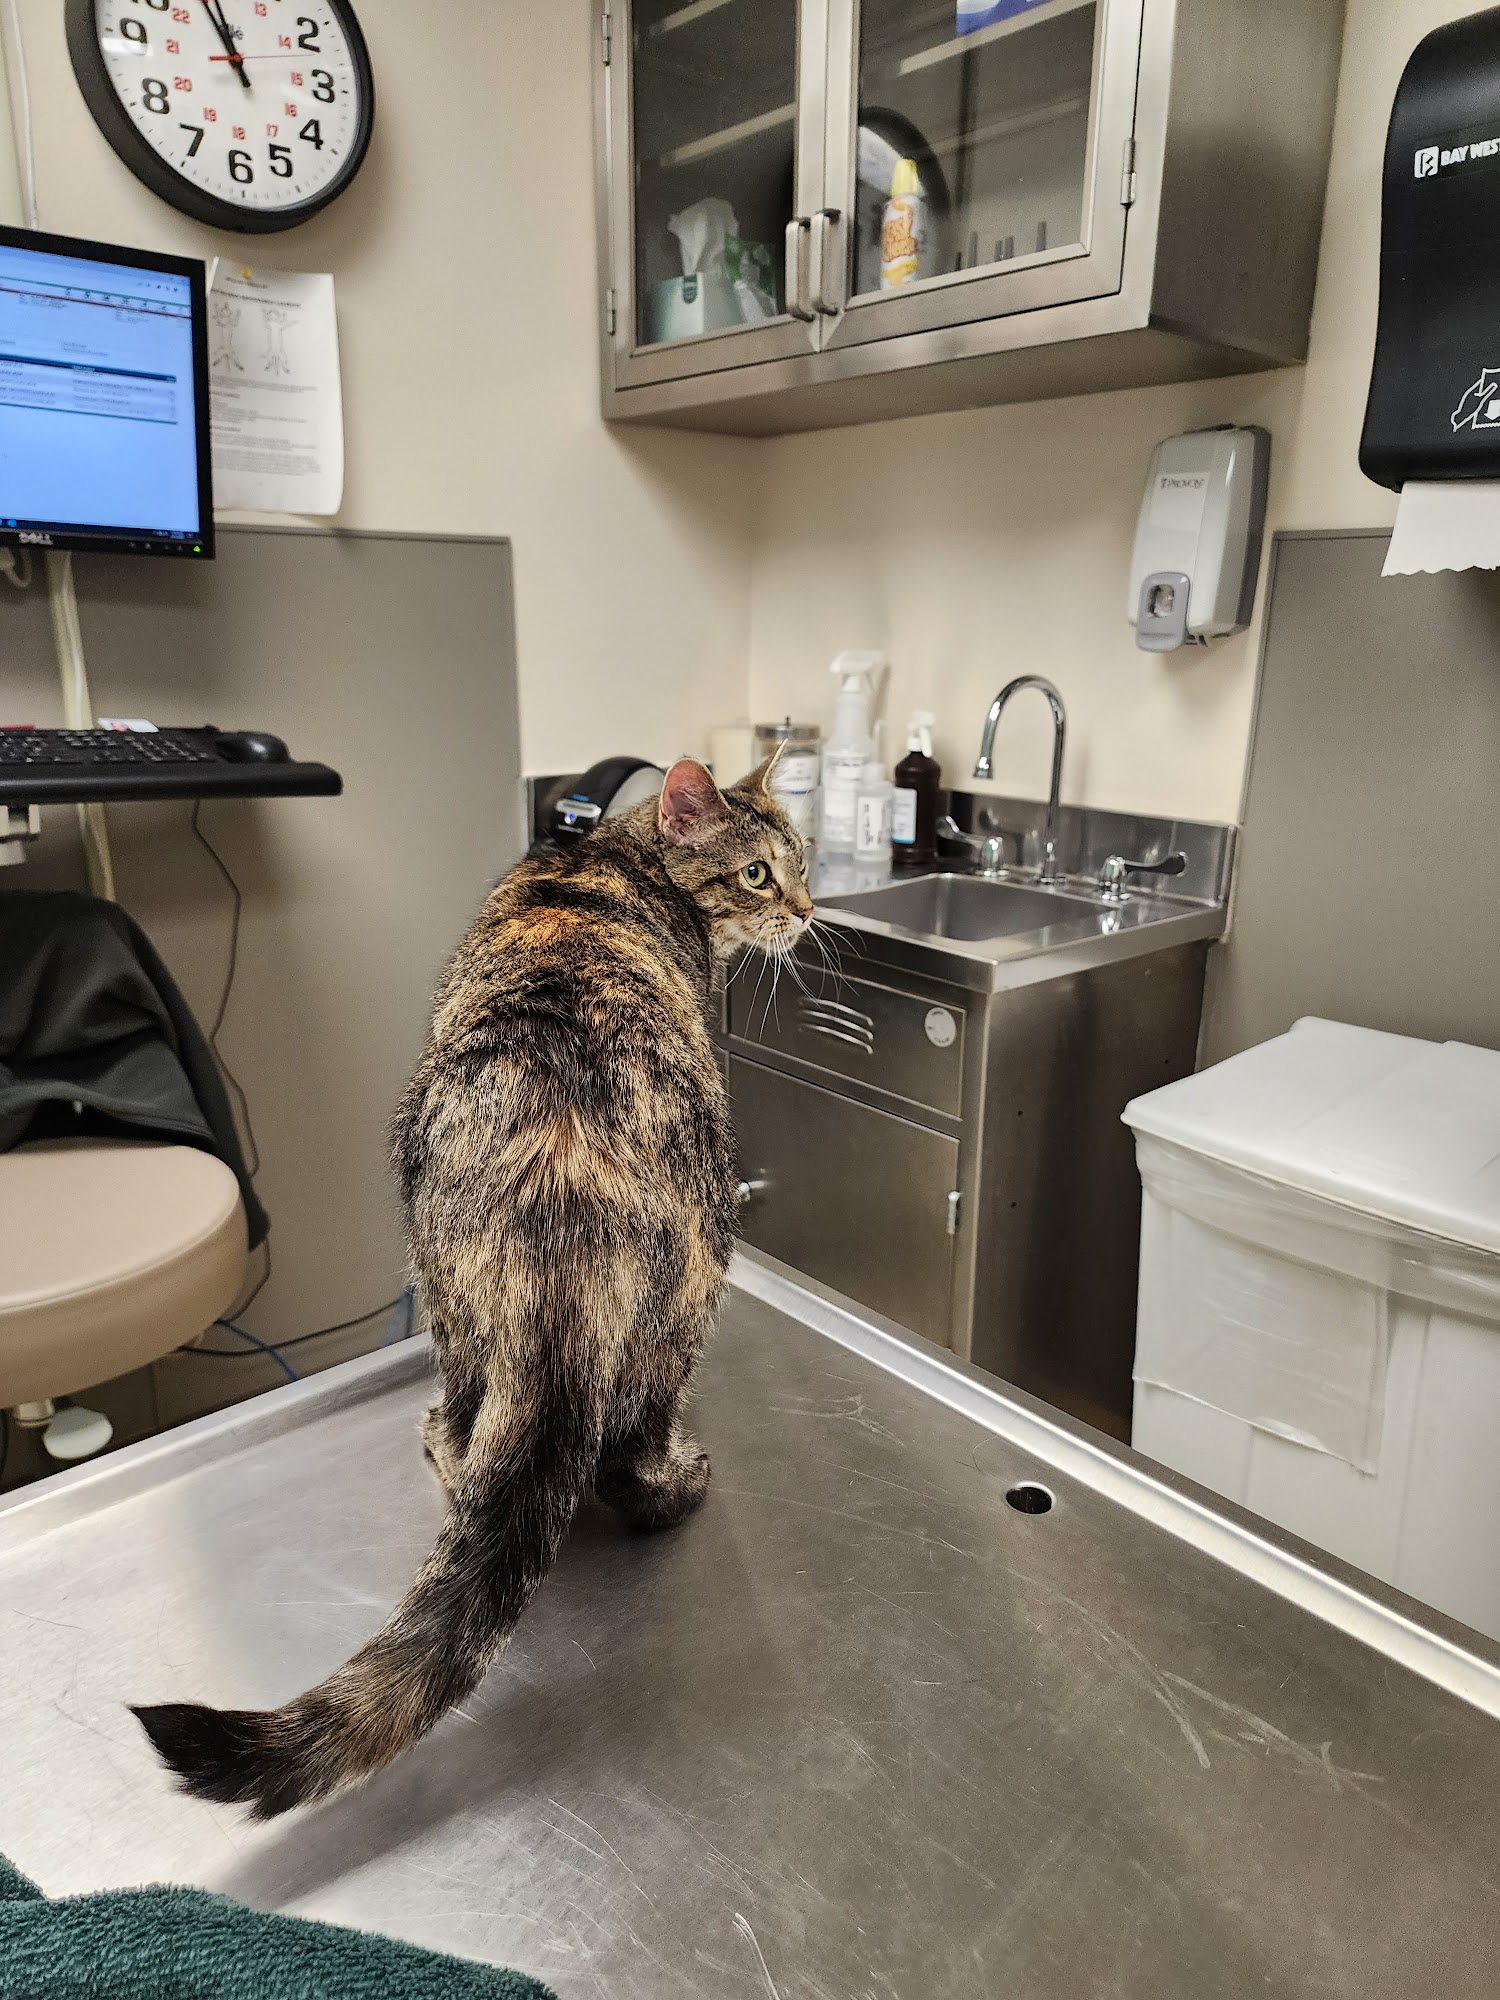 Fort Meade Veterinary Treatment Facility 2018 20th St, Fort Meade Maryland 20755